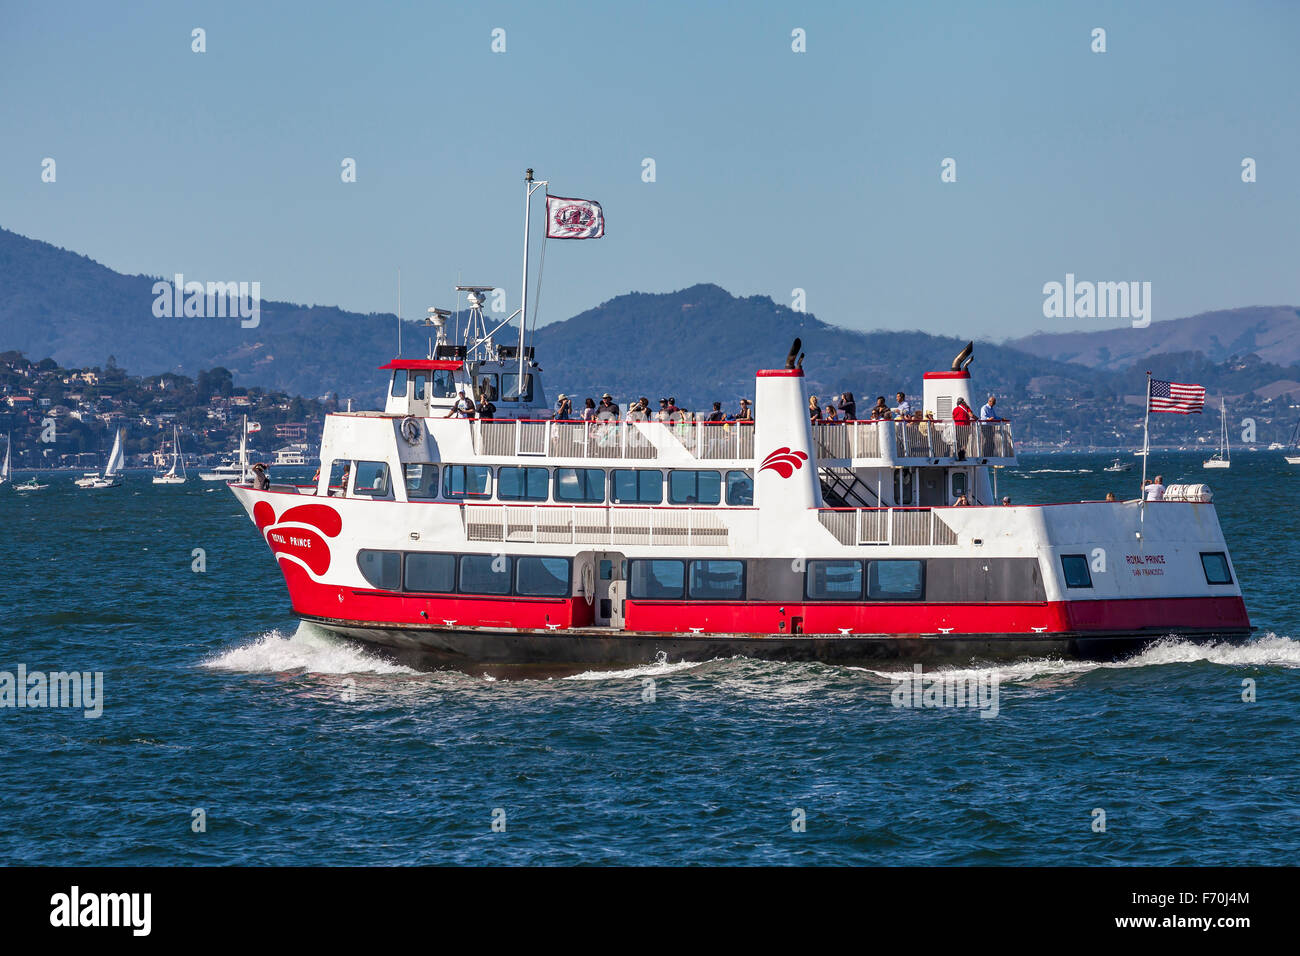 The Red and White ferry transporting passengers across the San Francisco Bay, San Francisco, California, USA Stock Photo